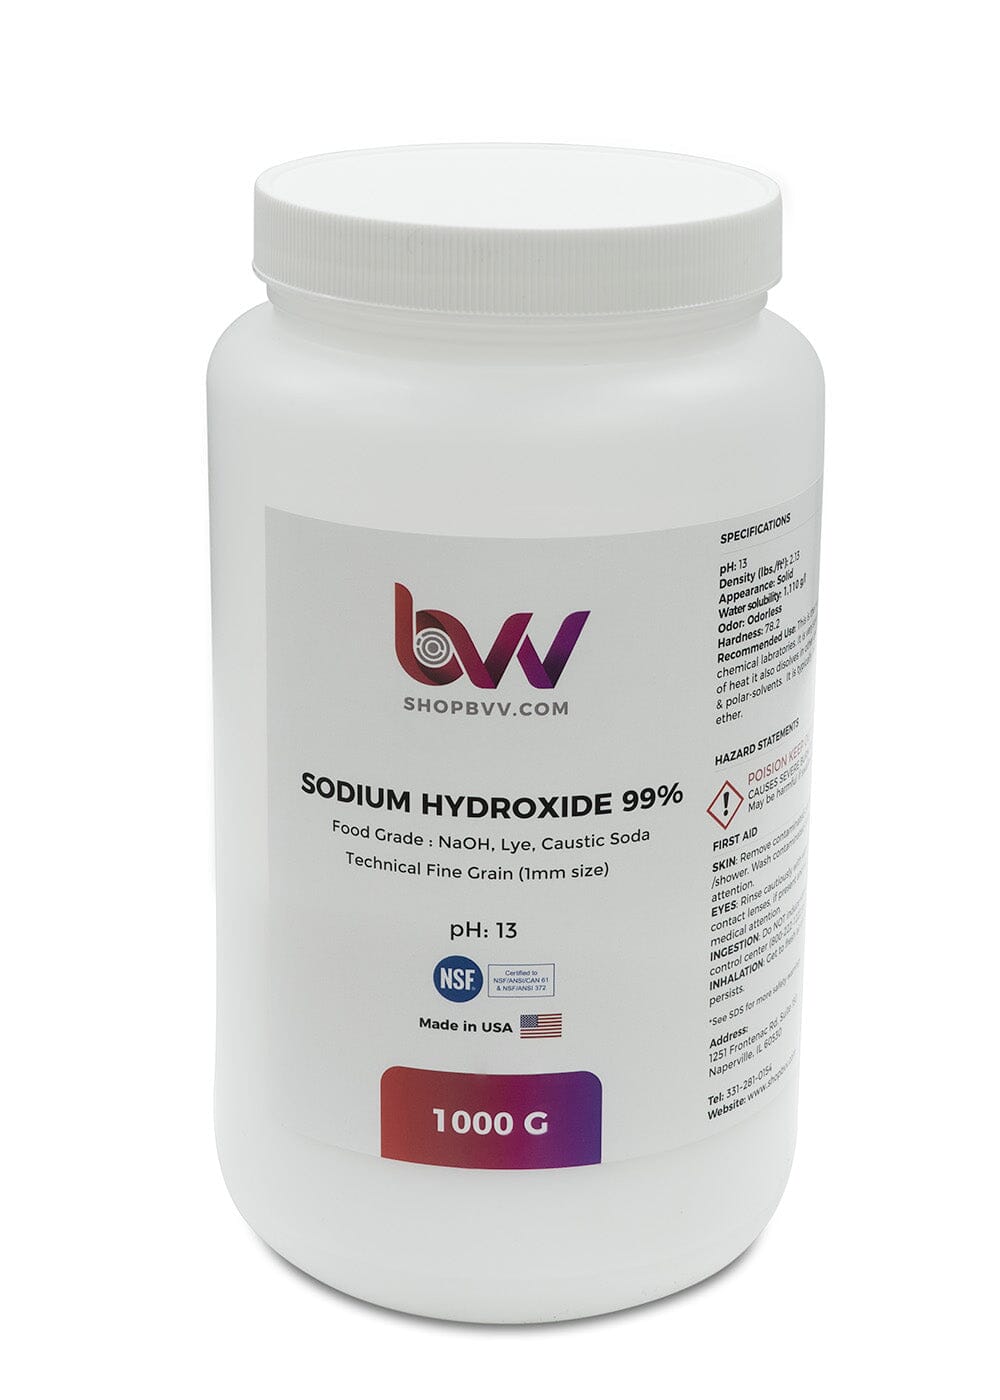 BVV™ High Purity Sodium Hydroxide 99% (Food Safe Chemical)